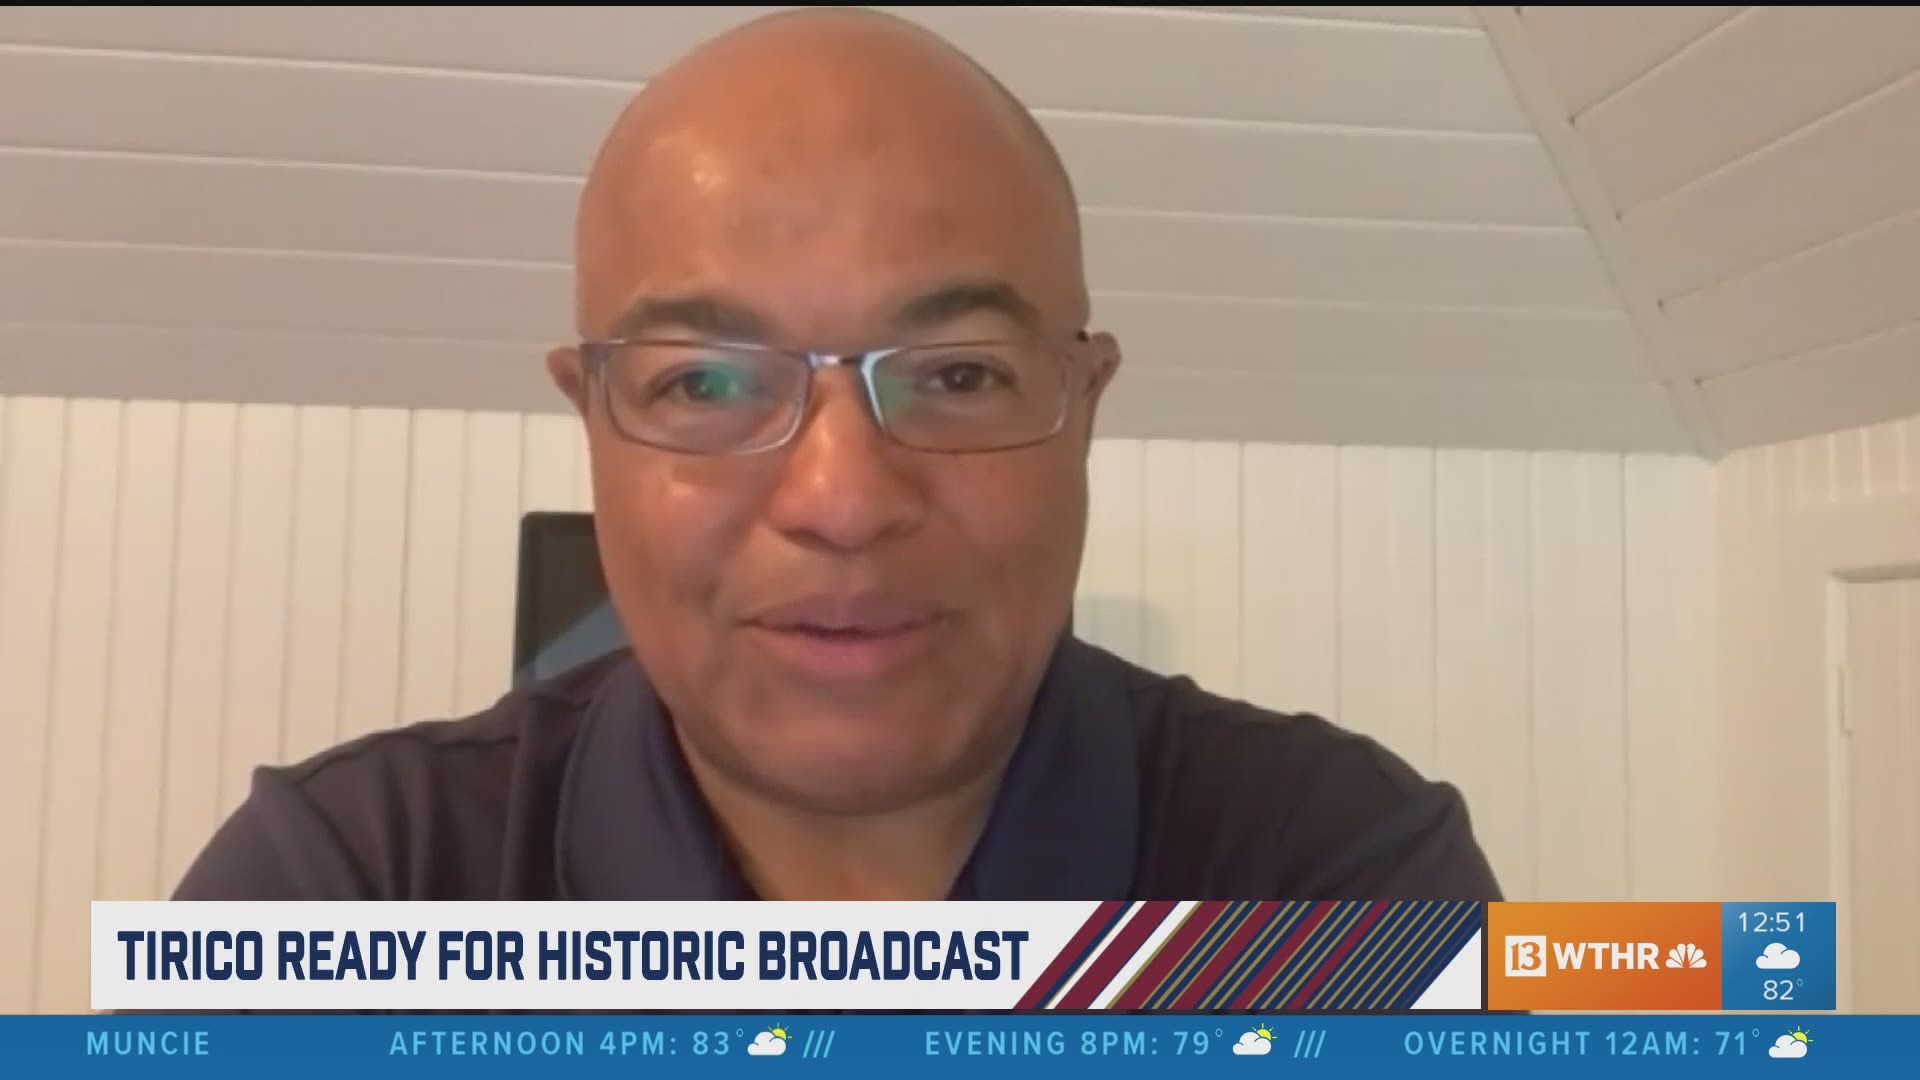 Mike Tirico spoke to 13News before the 104th Running of the Indianapolis 500.